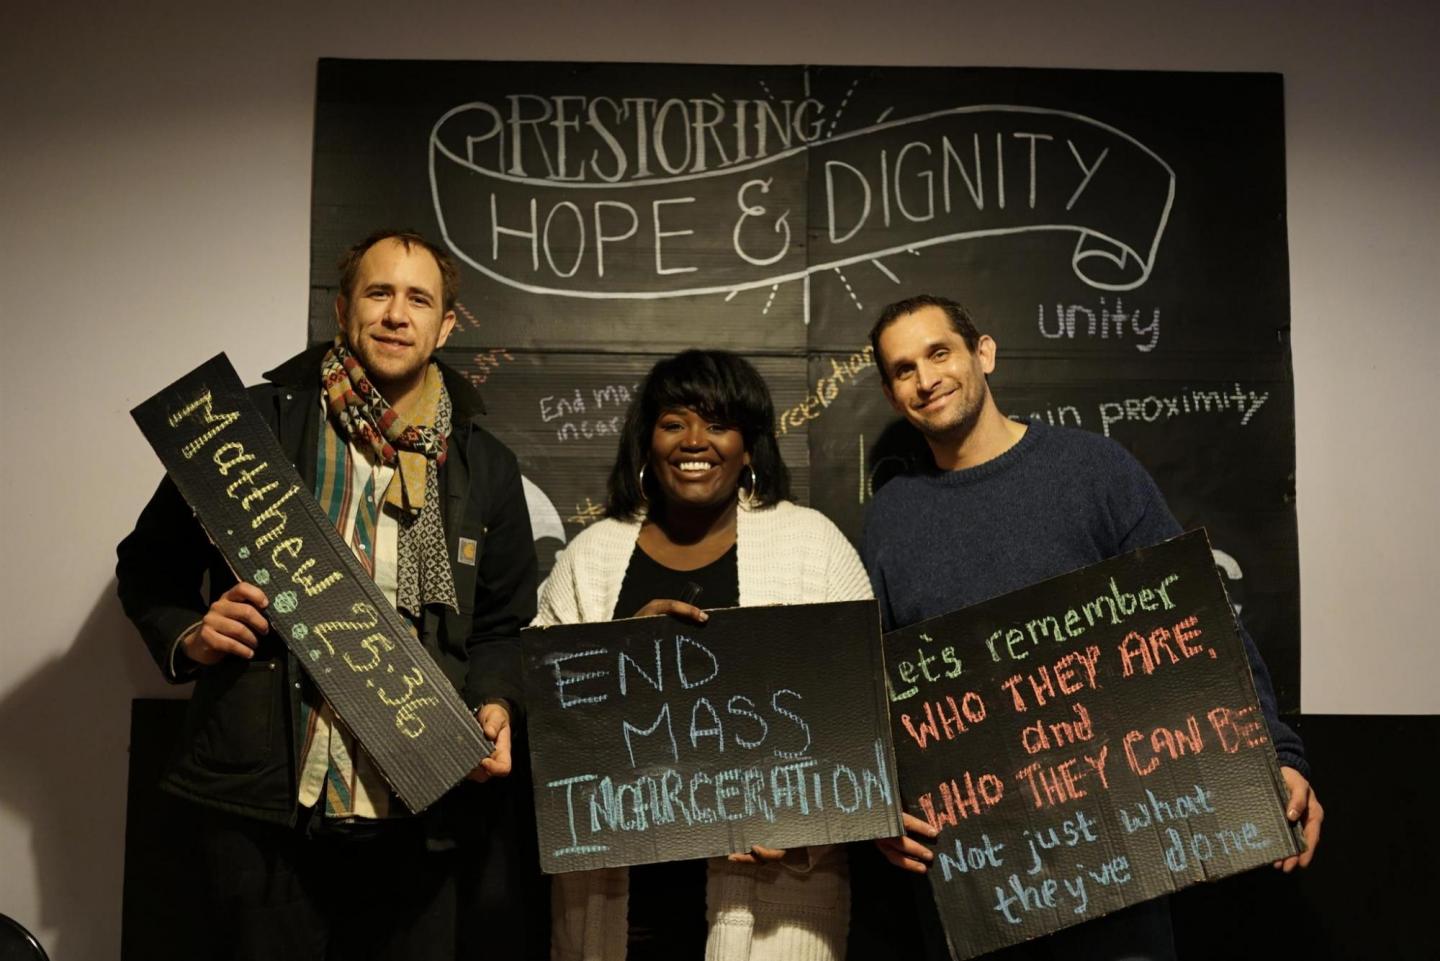 A group of three people pose in a makeshift photo booth with signs that say, "Matthew 25:26," "End mass incarceration" and "Let's remember who they are and who they can be not just what they've done."